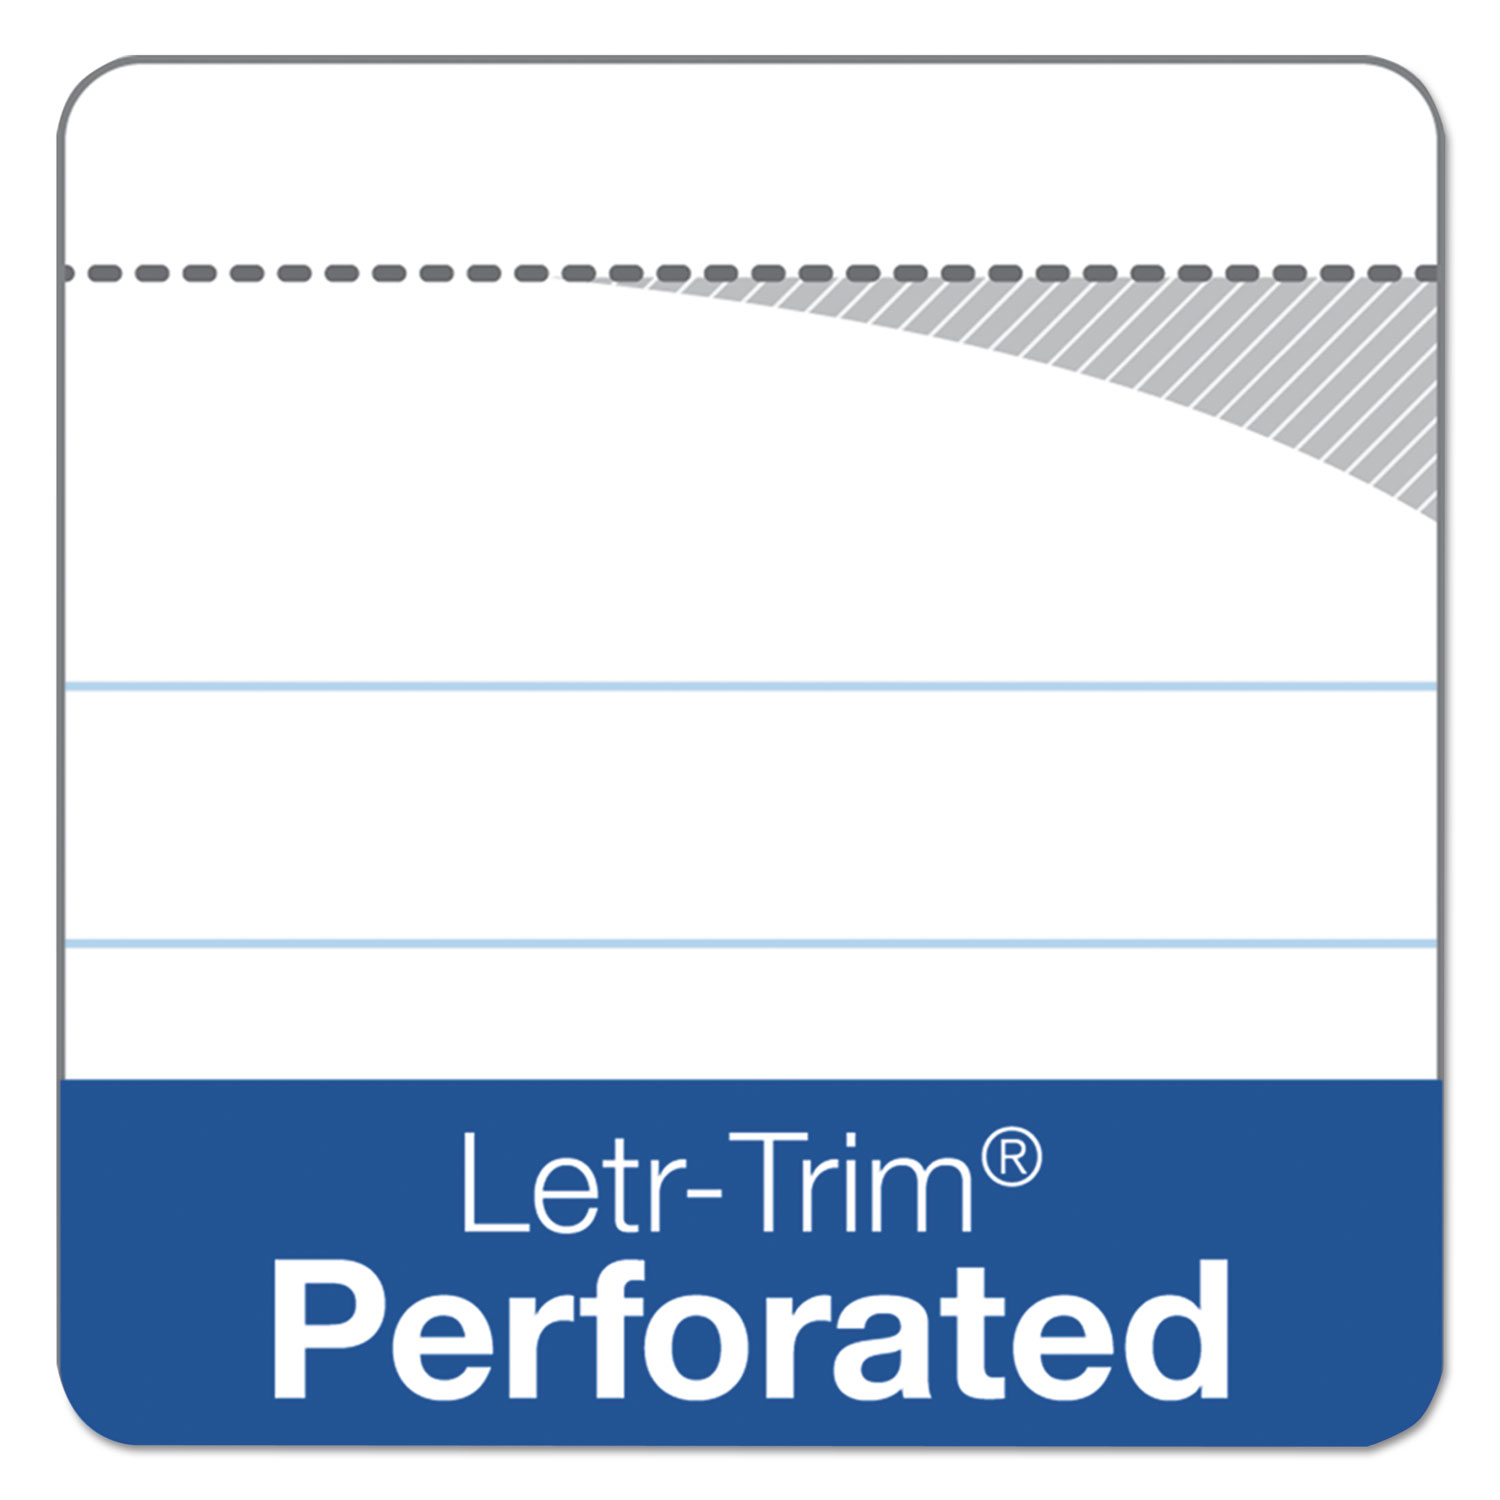 The Legal Pad Ruled Perforated Pads, 8 1/2 x 11 3/4, Canary, 50 Sheets, Dozen